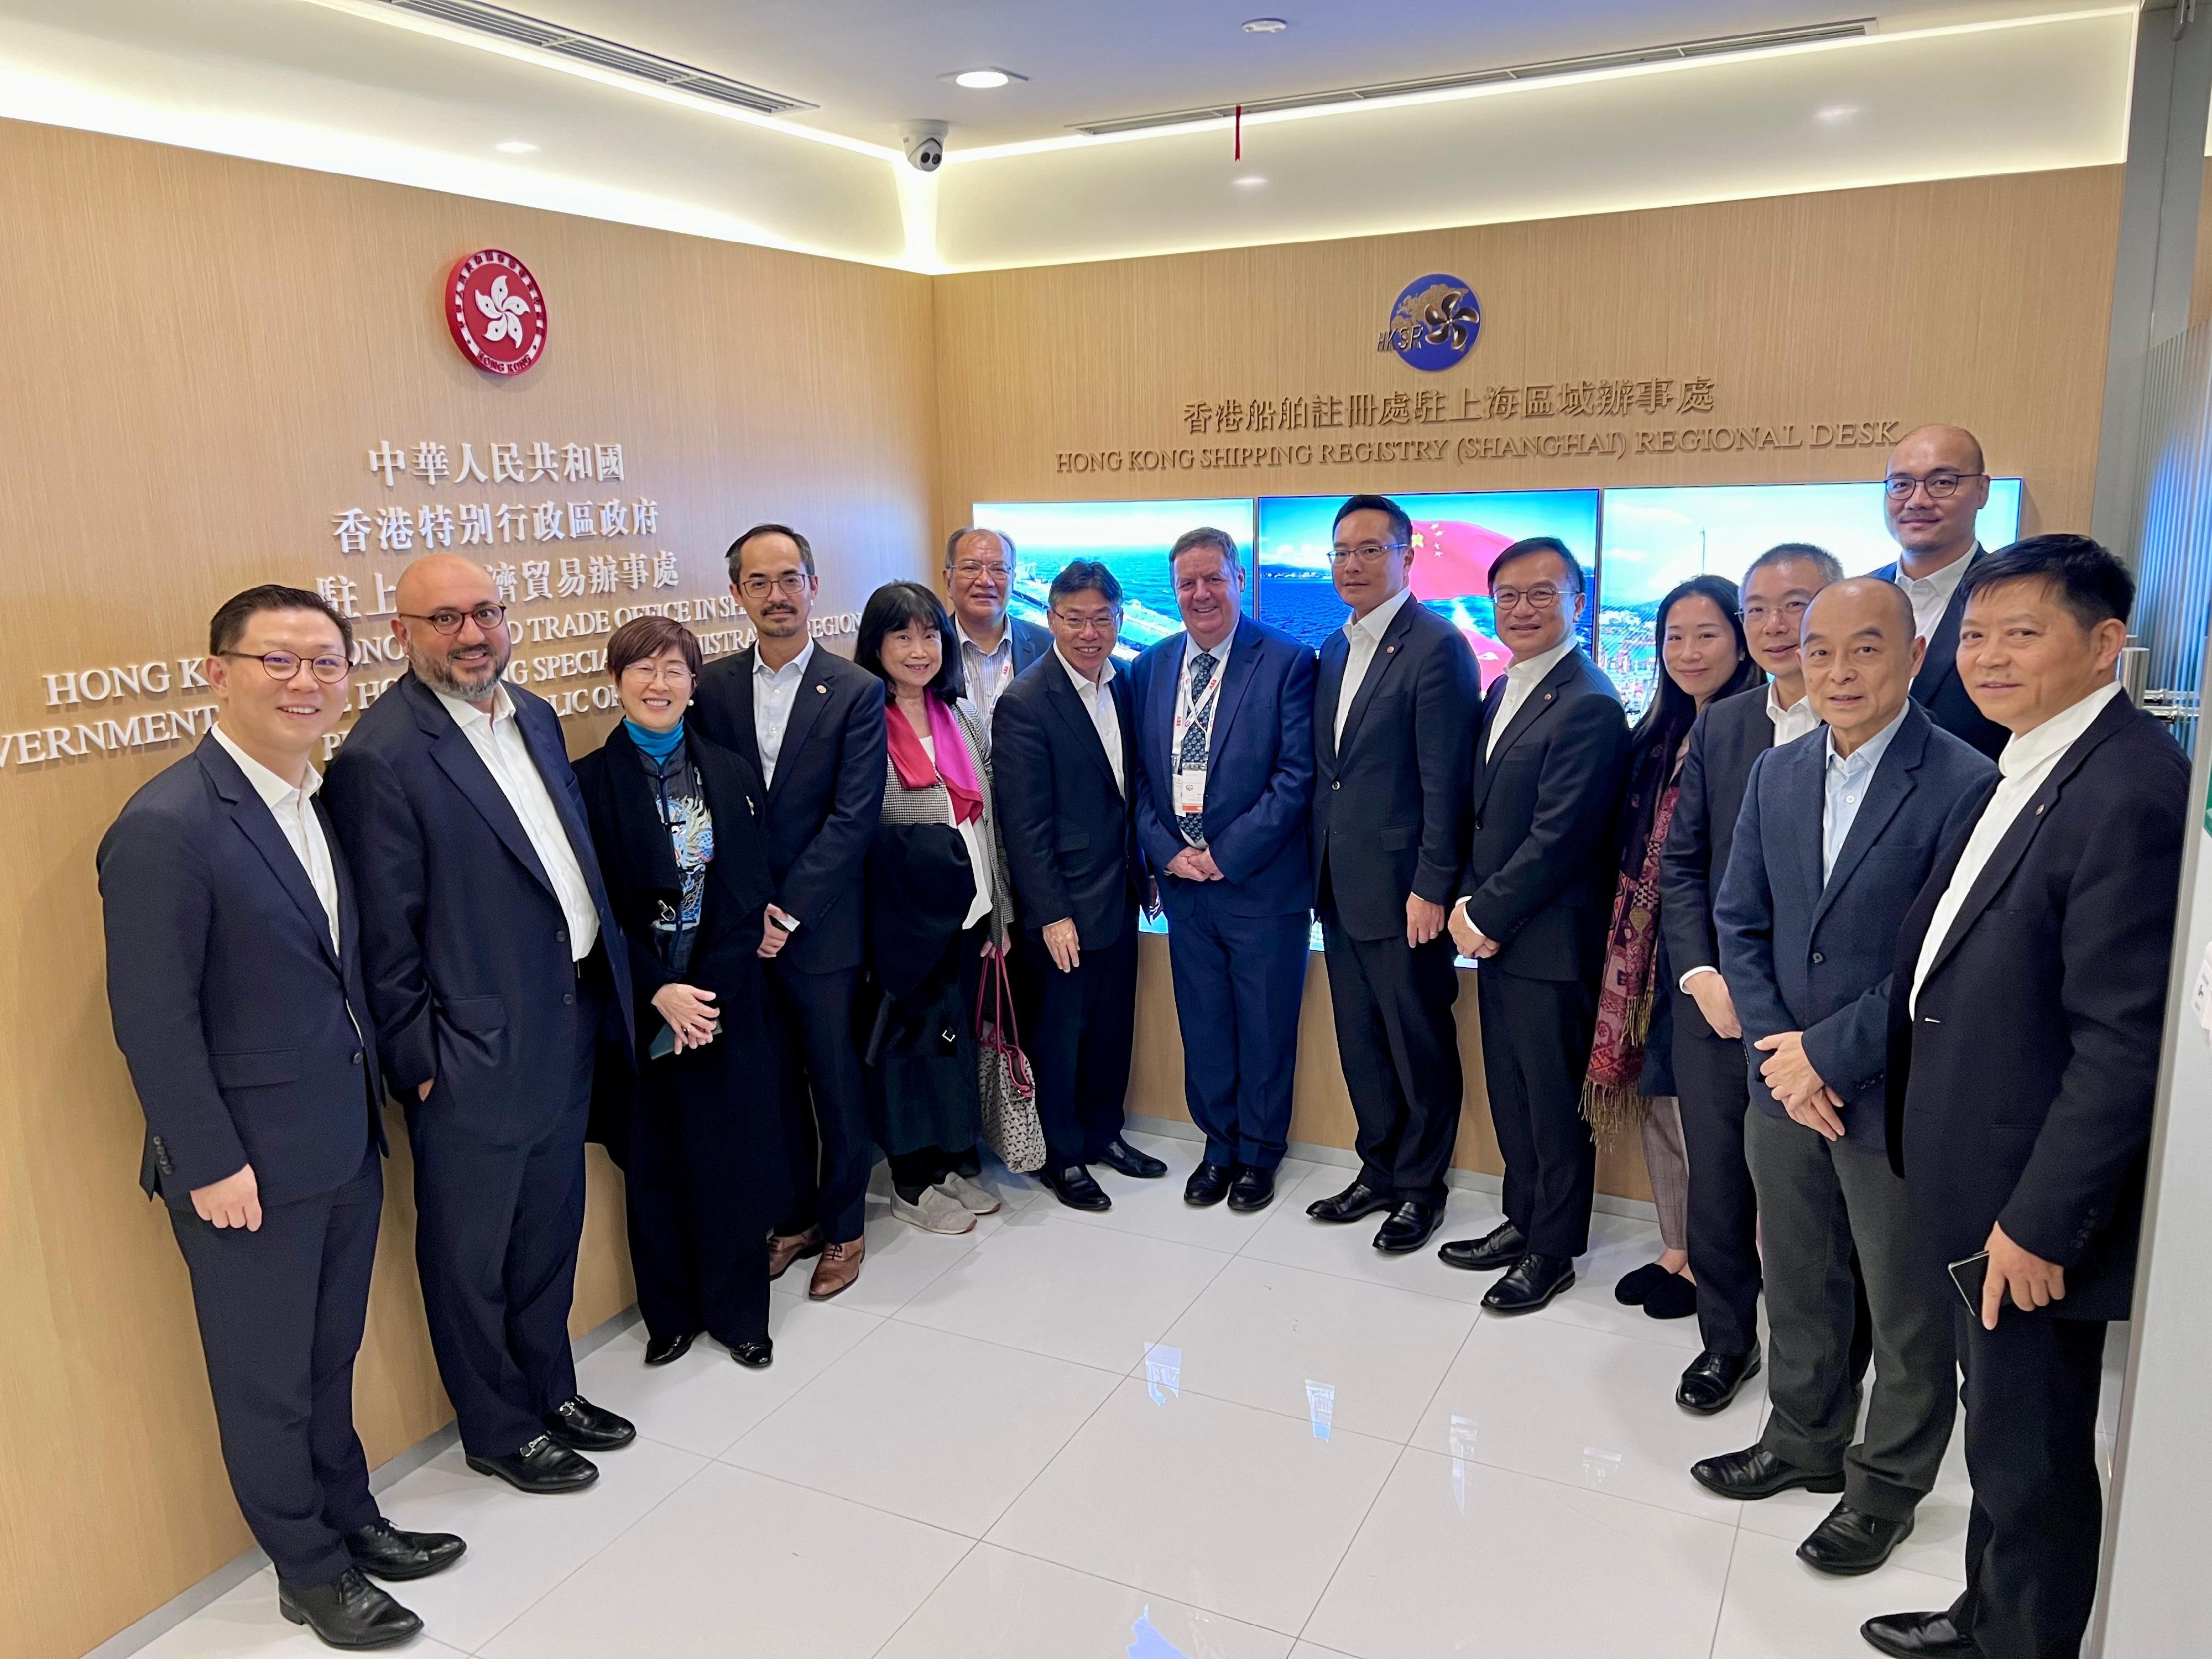 Accompanied by the Director of the Hong Kong Economic and Trade Office in Shanghai, Mrs Laura Aron (third left), the Chairman of the Hong Kong Maritime and Port Board (HKMPB) and Secretary for Transport and Logistics, Mr Lam Sai-hung (seventh left), leads members of the HKMPB to visit the Hong Kong Shipping Registry (Shanghai) Regional Desk today (December 5) and learn about its operation since its establishment four years ago.